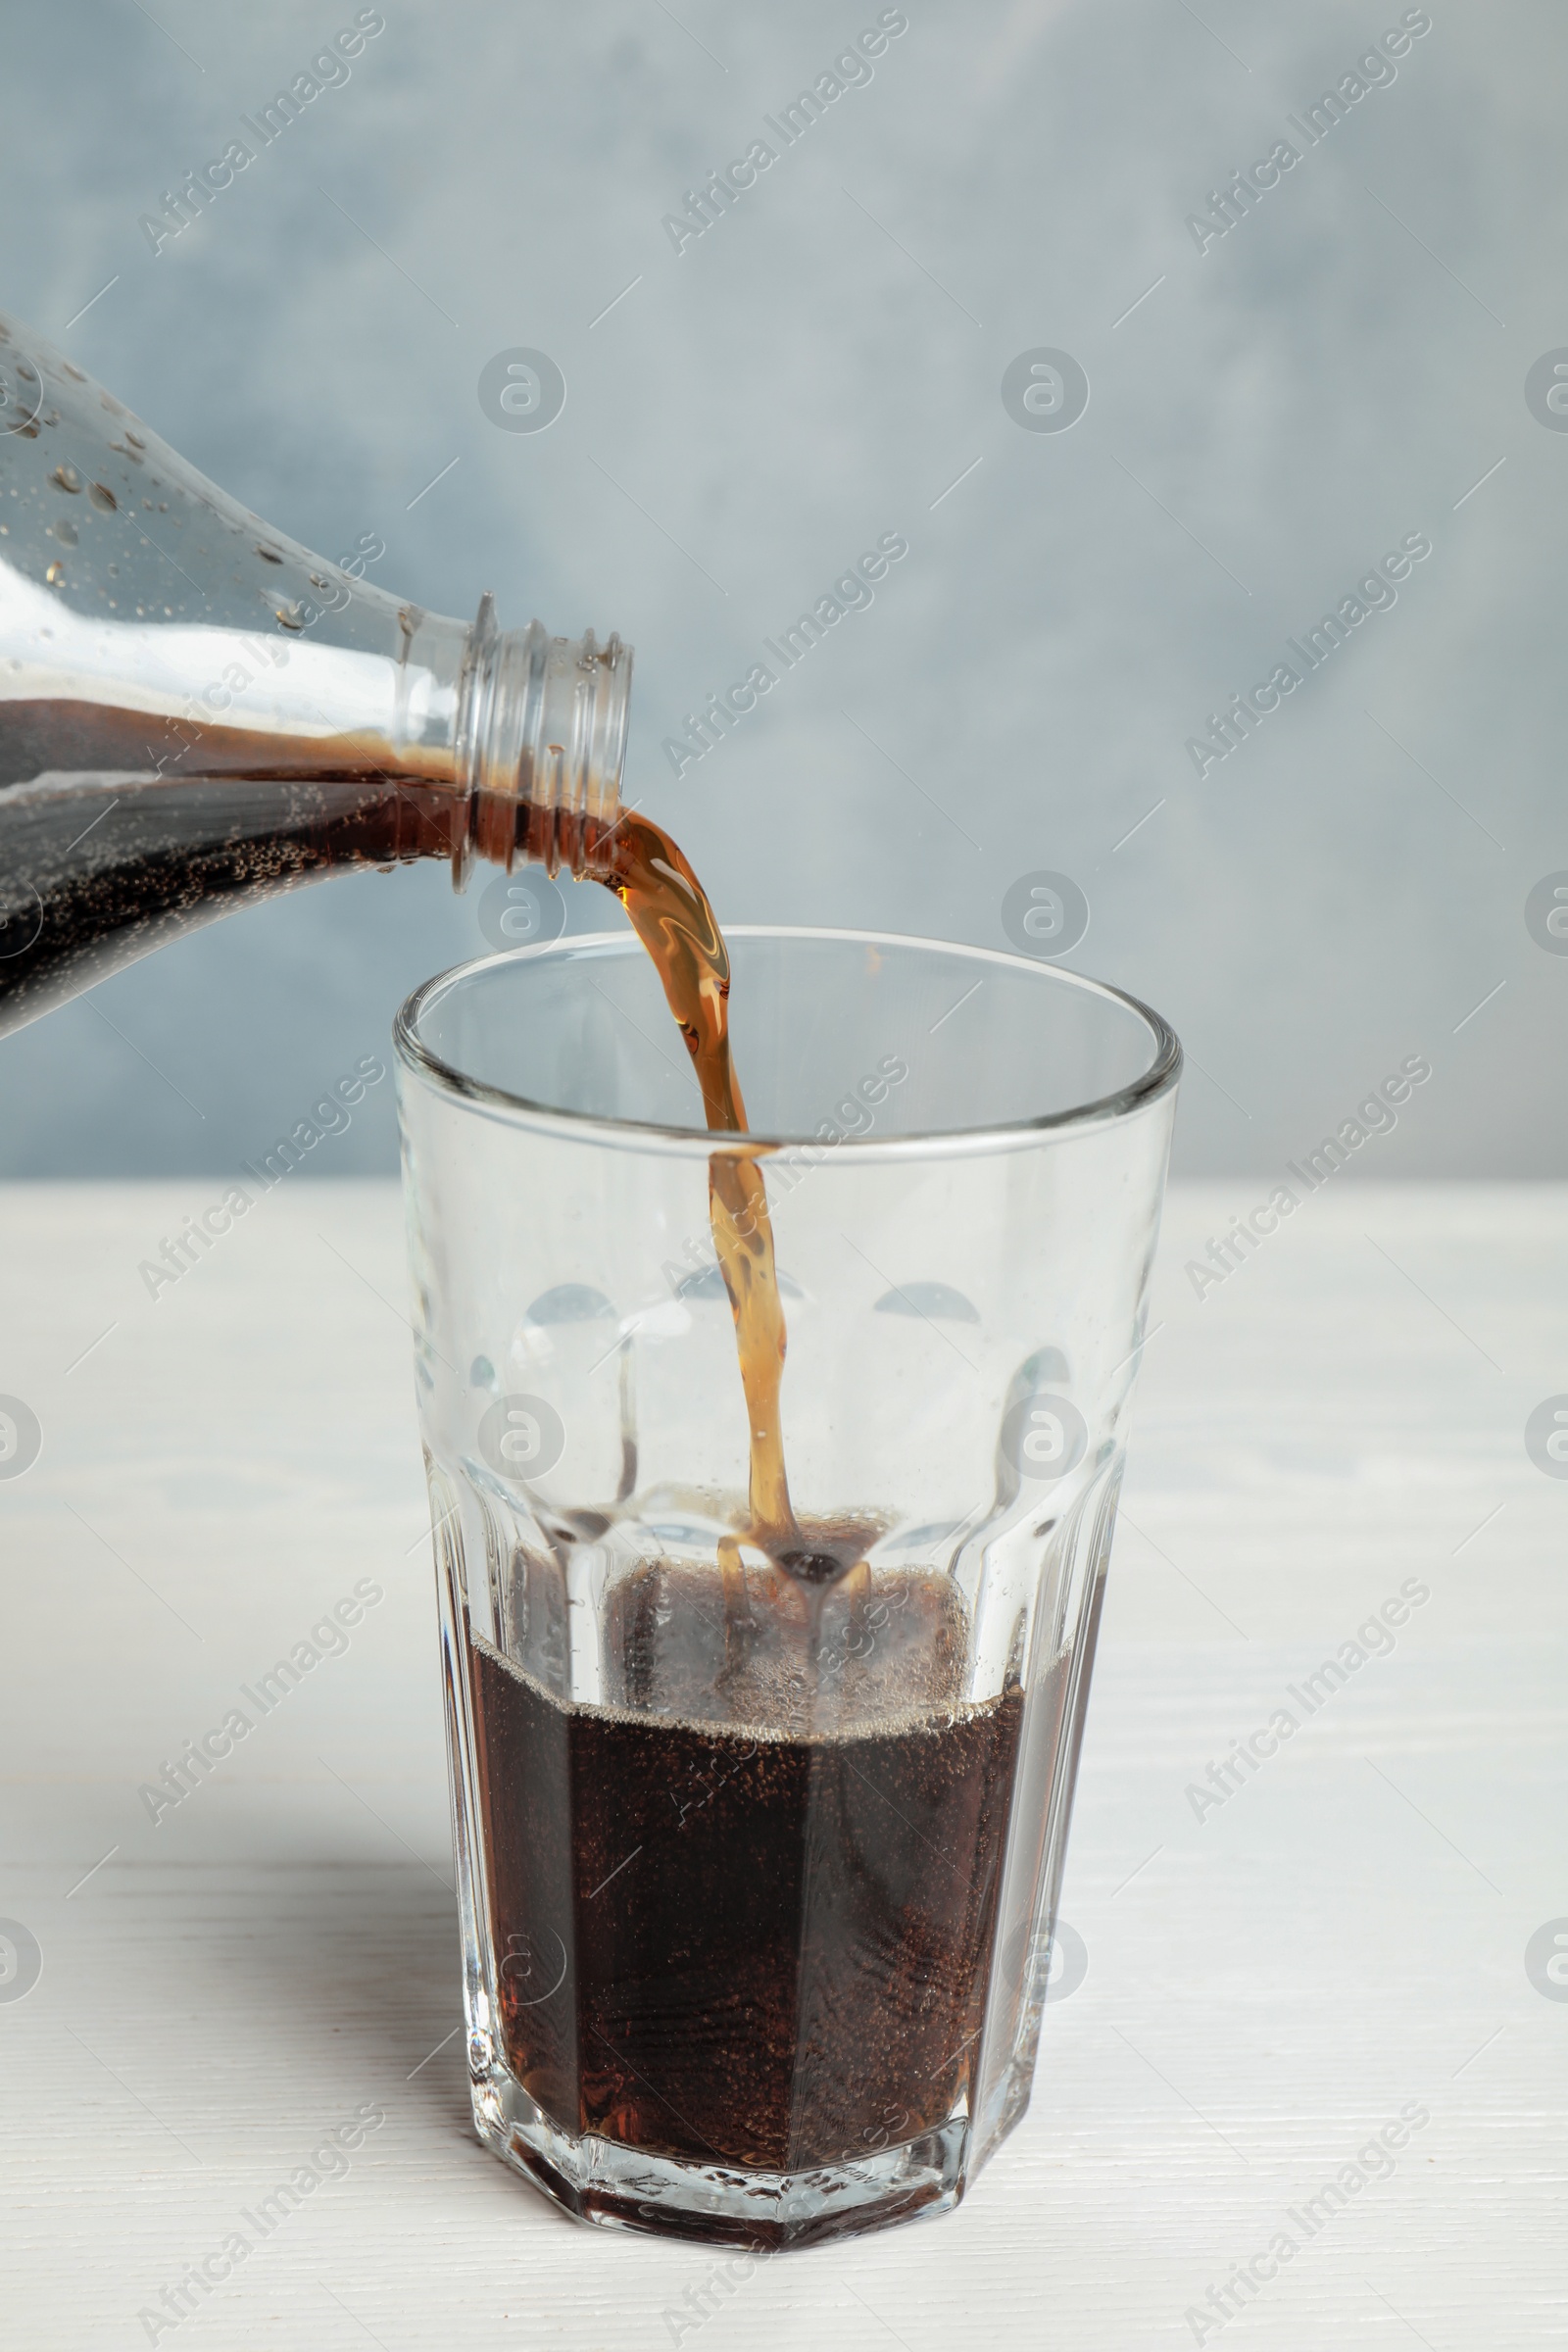 Photo of Pouring refreshing soda drink into glass on white wooden table against blue background